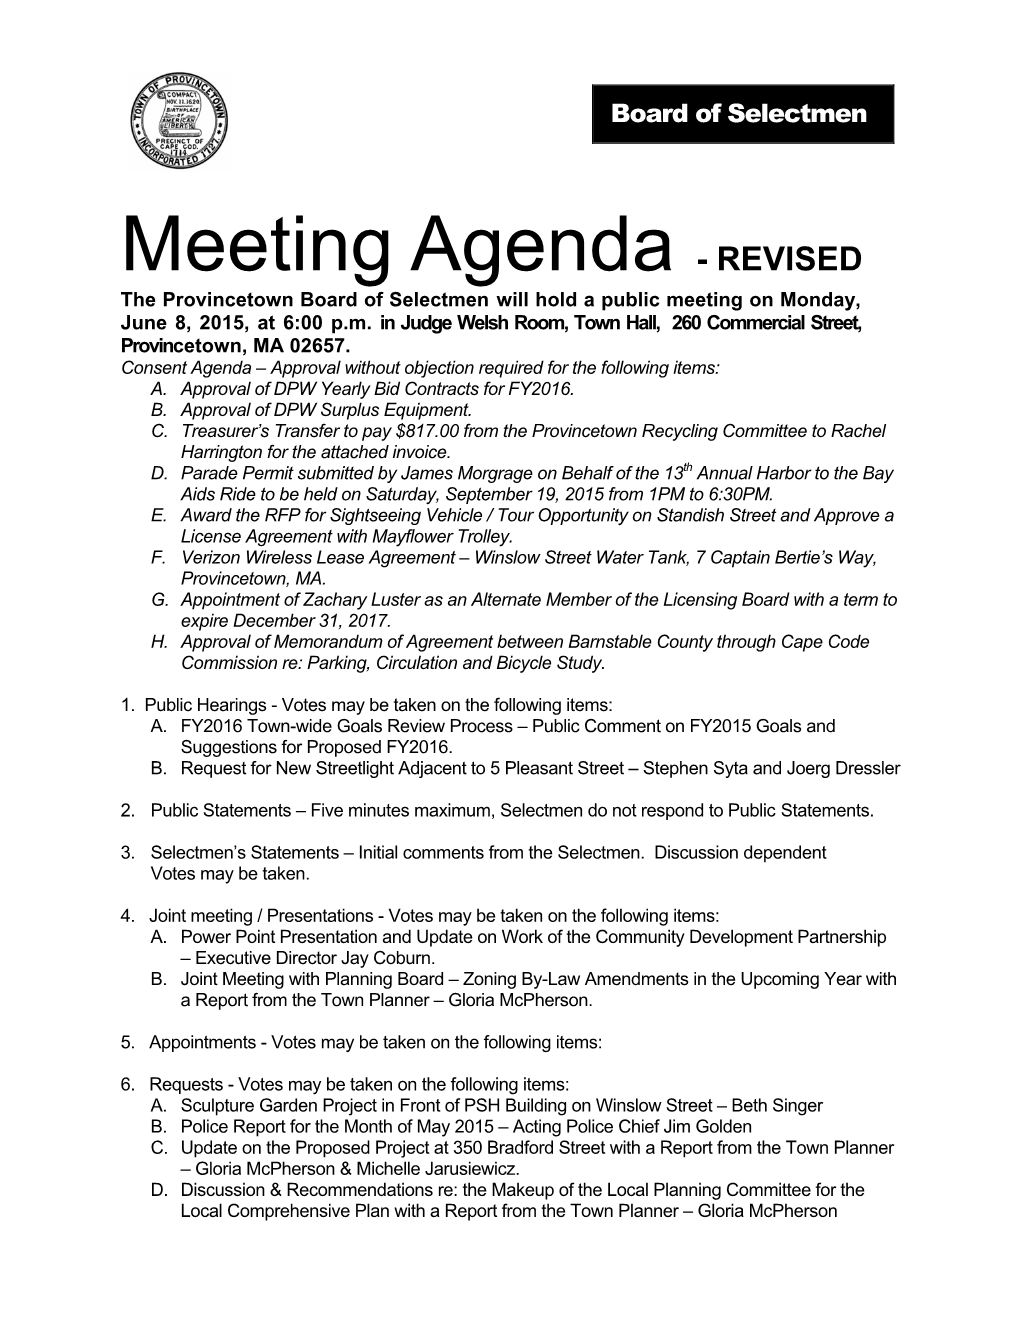 Meeting Agenda - REVISED the Provincetown Board of Selectmen Will Hold a Public Meeting on Monday, June 8, 2015, at 6:00 P.M